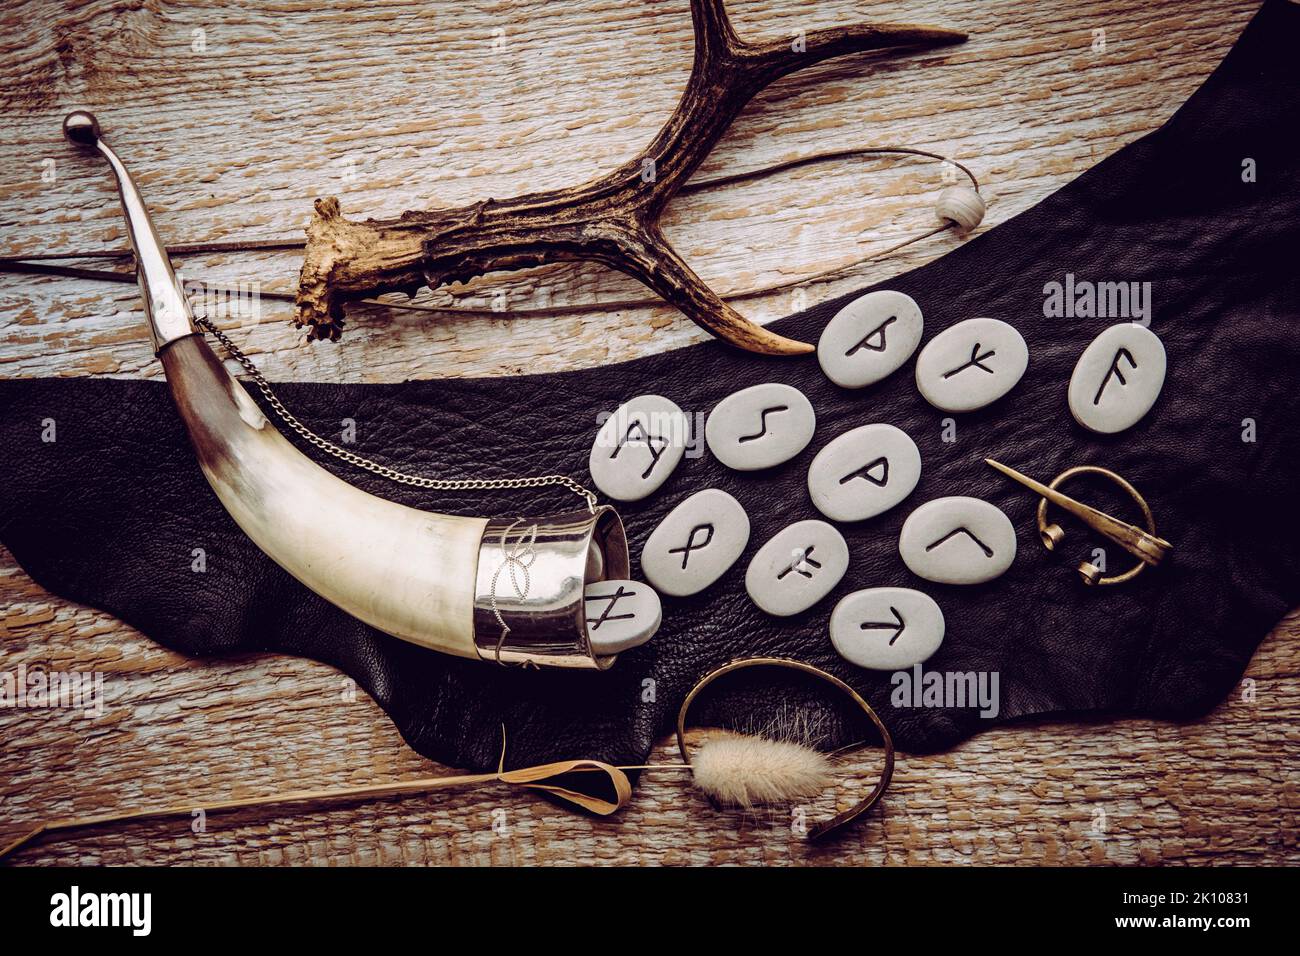 Above view of rune stones with various viking era style objects, drinking horn, bronze brooch, glass bead on leather string. Ancient divination. Stock Photo